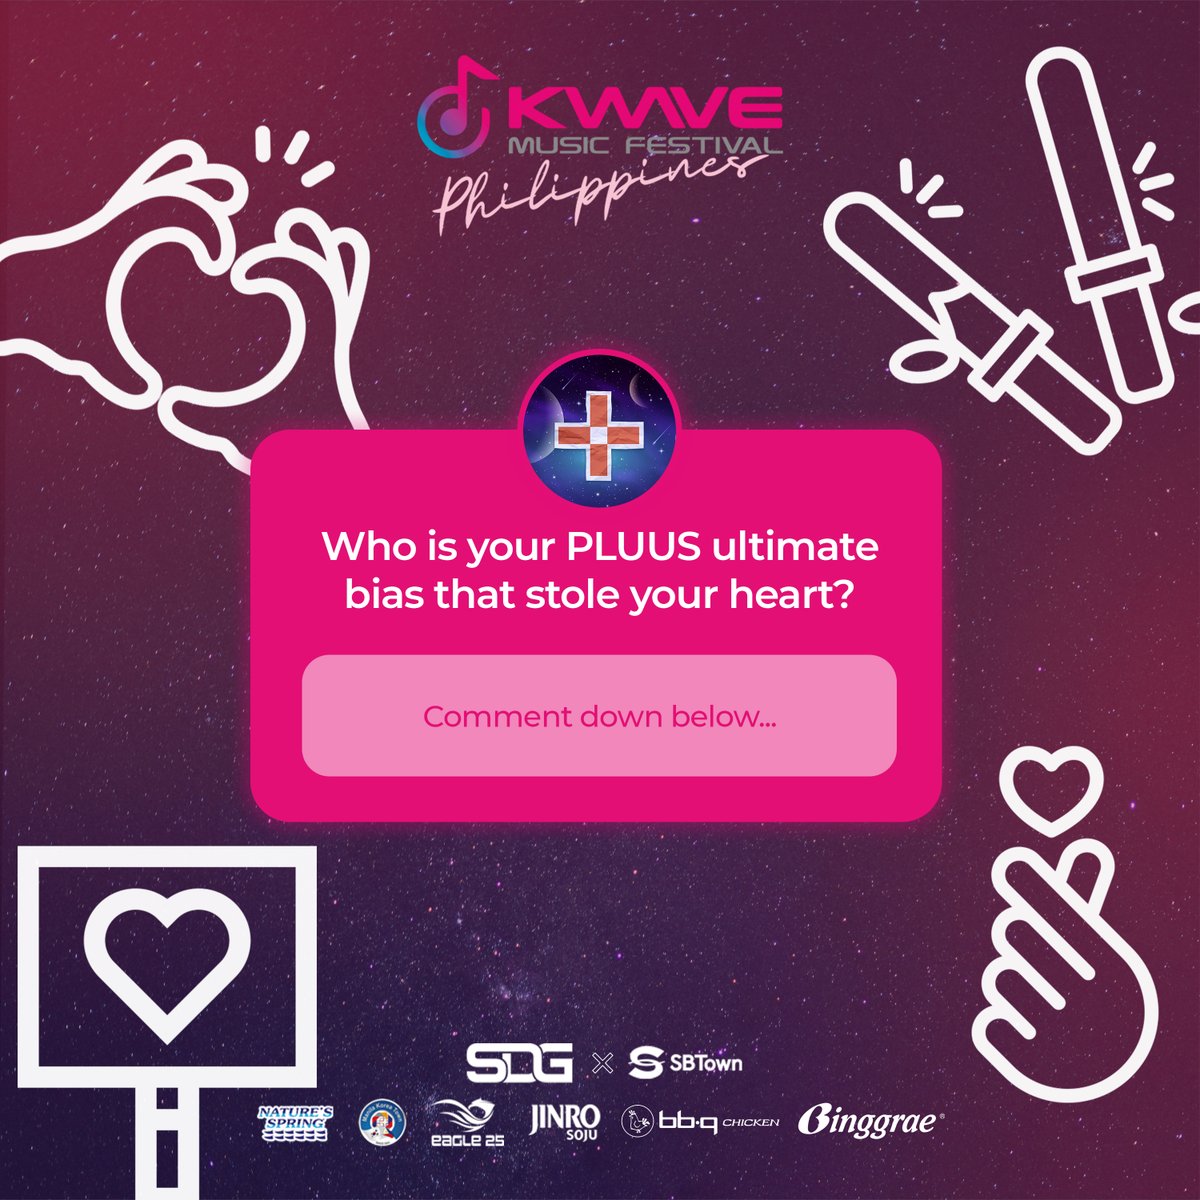 La, la, la, la, la, la~ We know who will complete your universe, KWAVERS!

Have you discovered your ultimate bias from @pluus_official yet? If not, don't miss out on their electrifying performances on May 11! 🎶

#PLUUS #KWAVEPH #AbsolutelyLibre #KWAVEMusicFestival #KWAVE